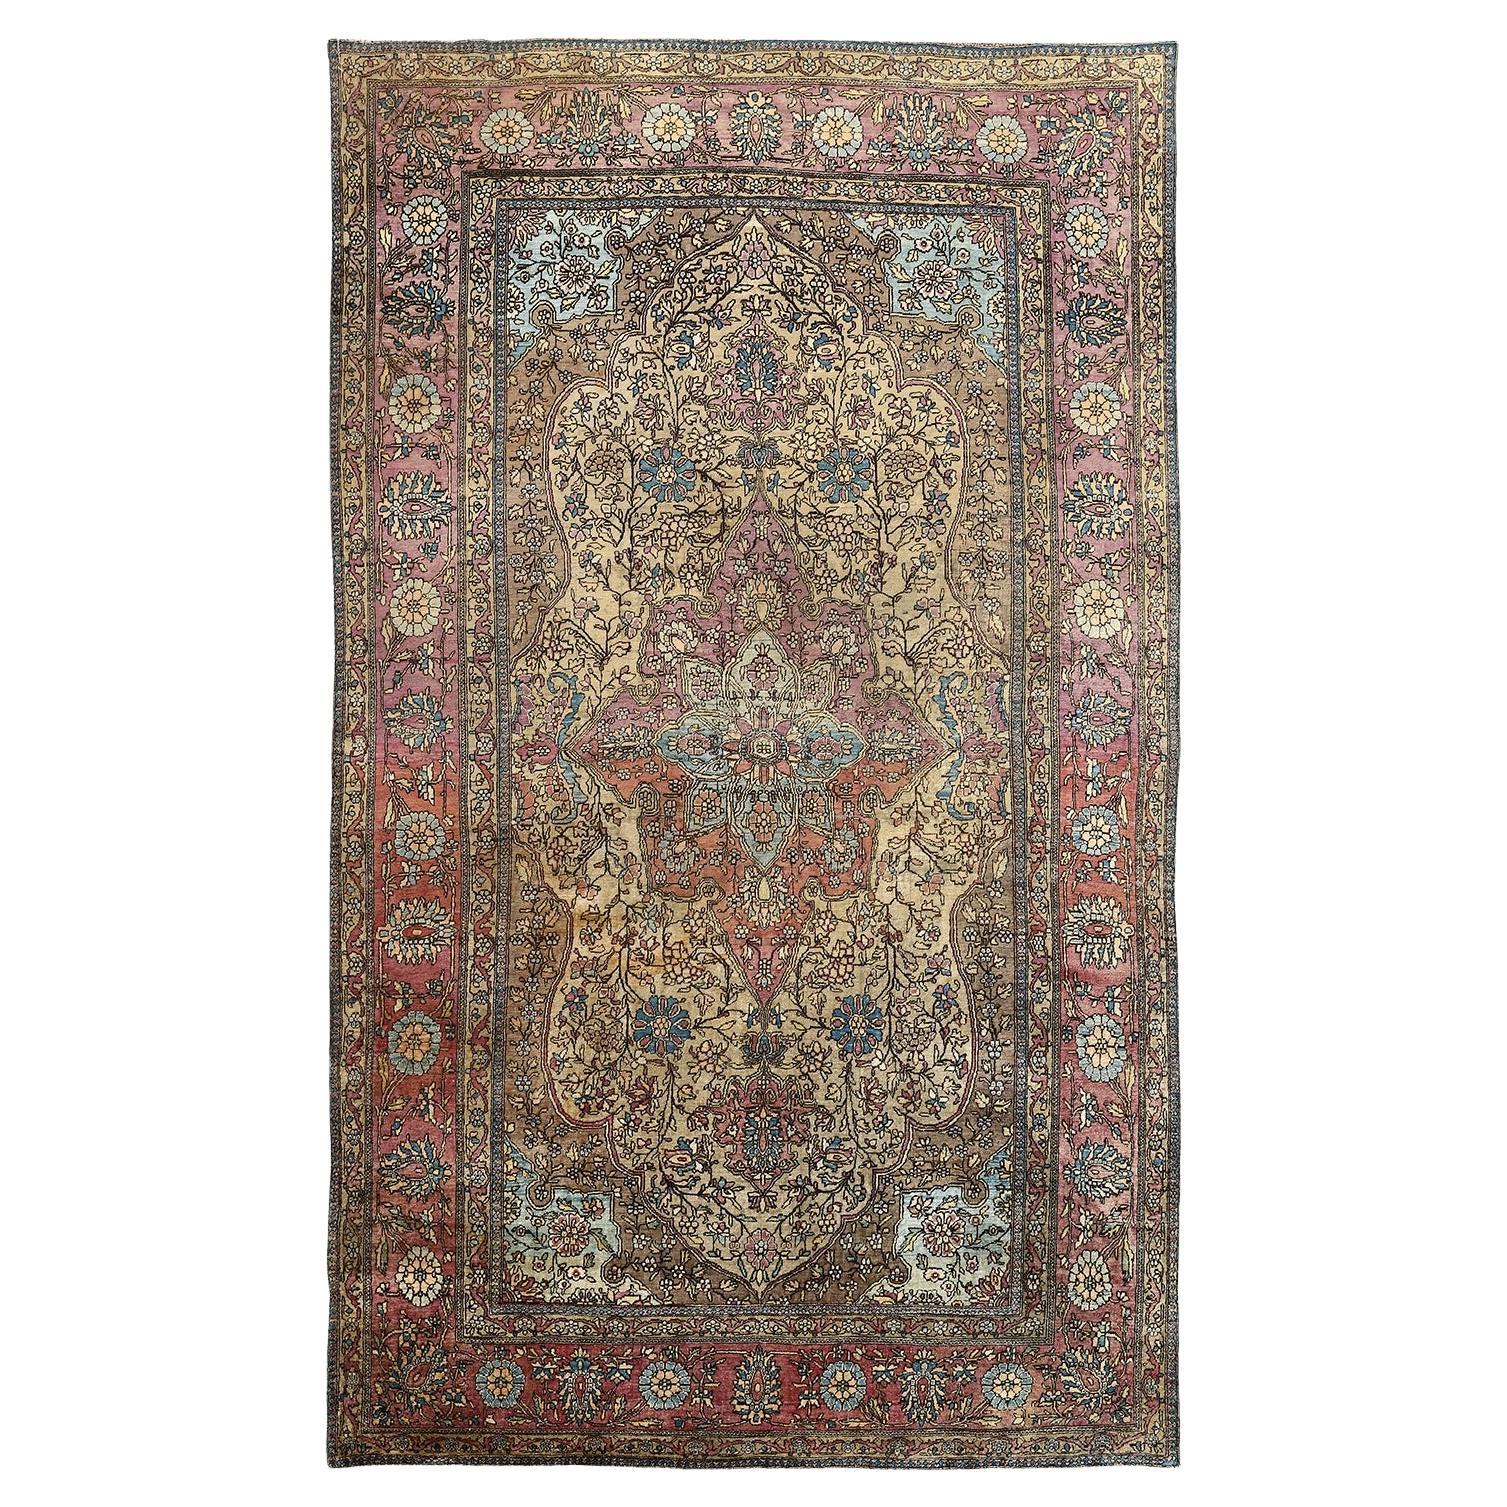 Damoka Collection Pure Silk Persian Antique Farahan - Size: 7 ft 6 in x 4 ft 4in